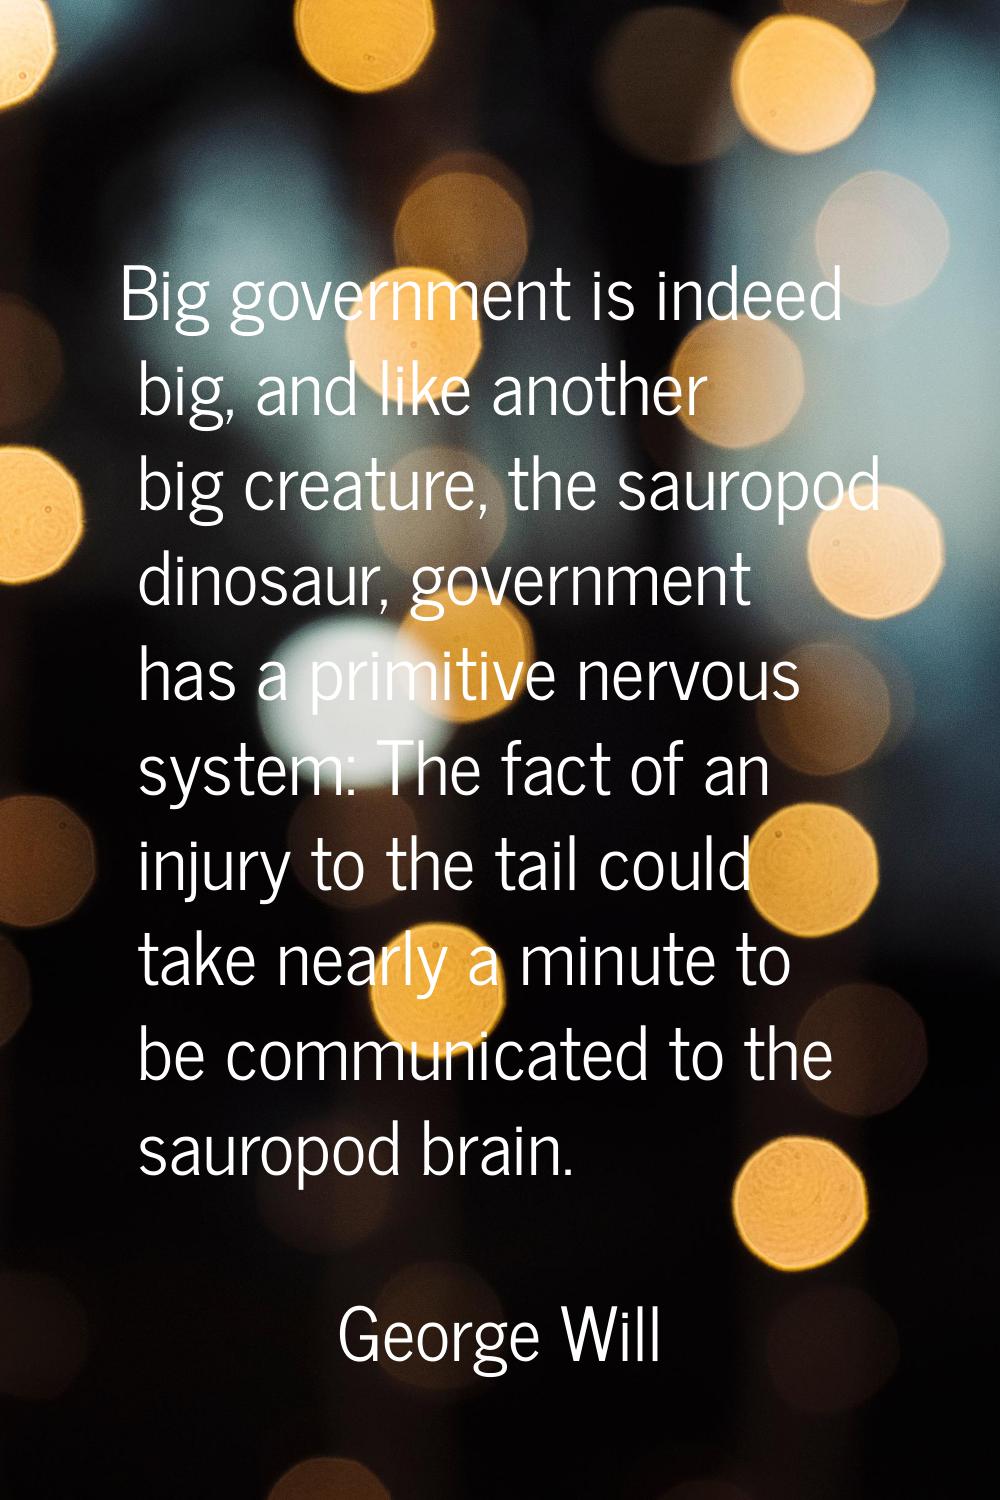 Big government is indeed big, and like another big creature, the sauropod dinosaur, government has 